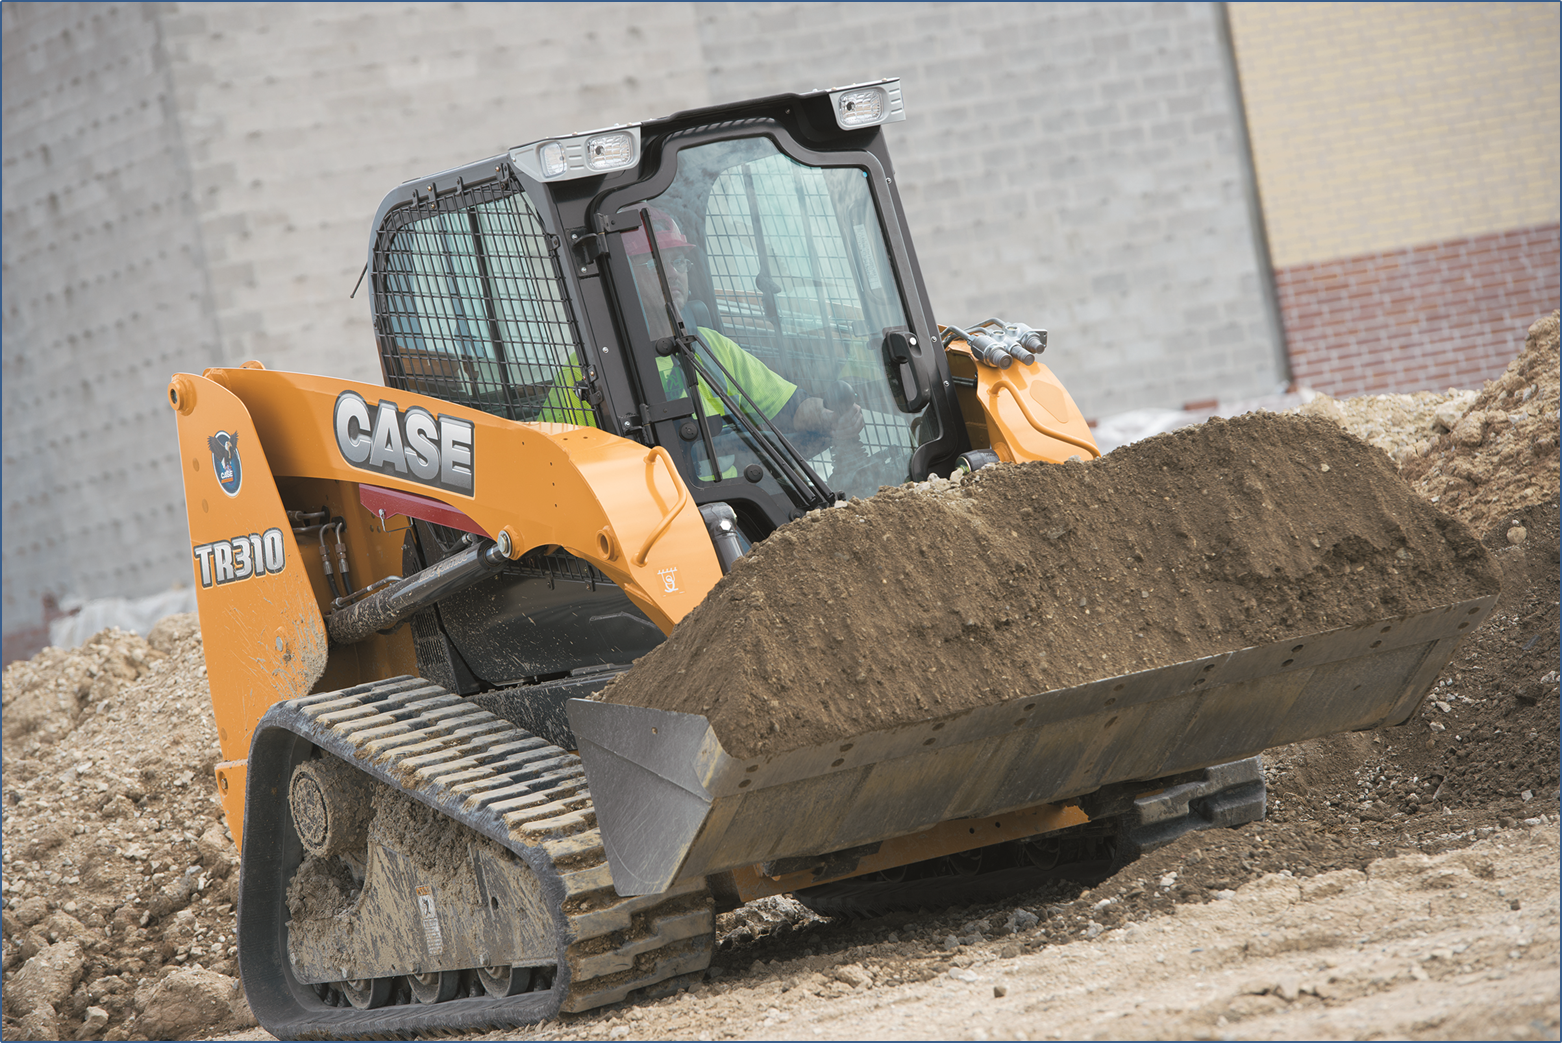 TR310 compact track loader